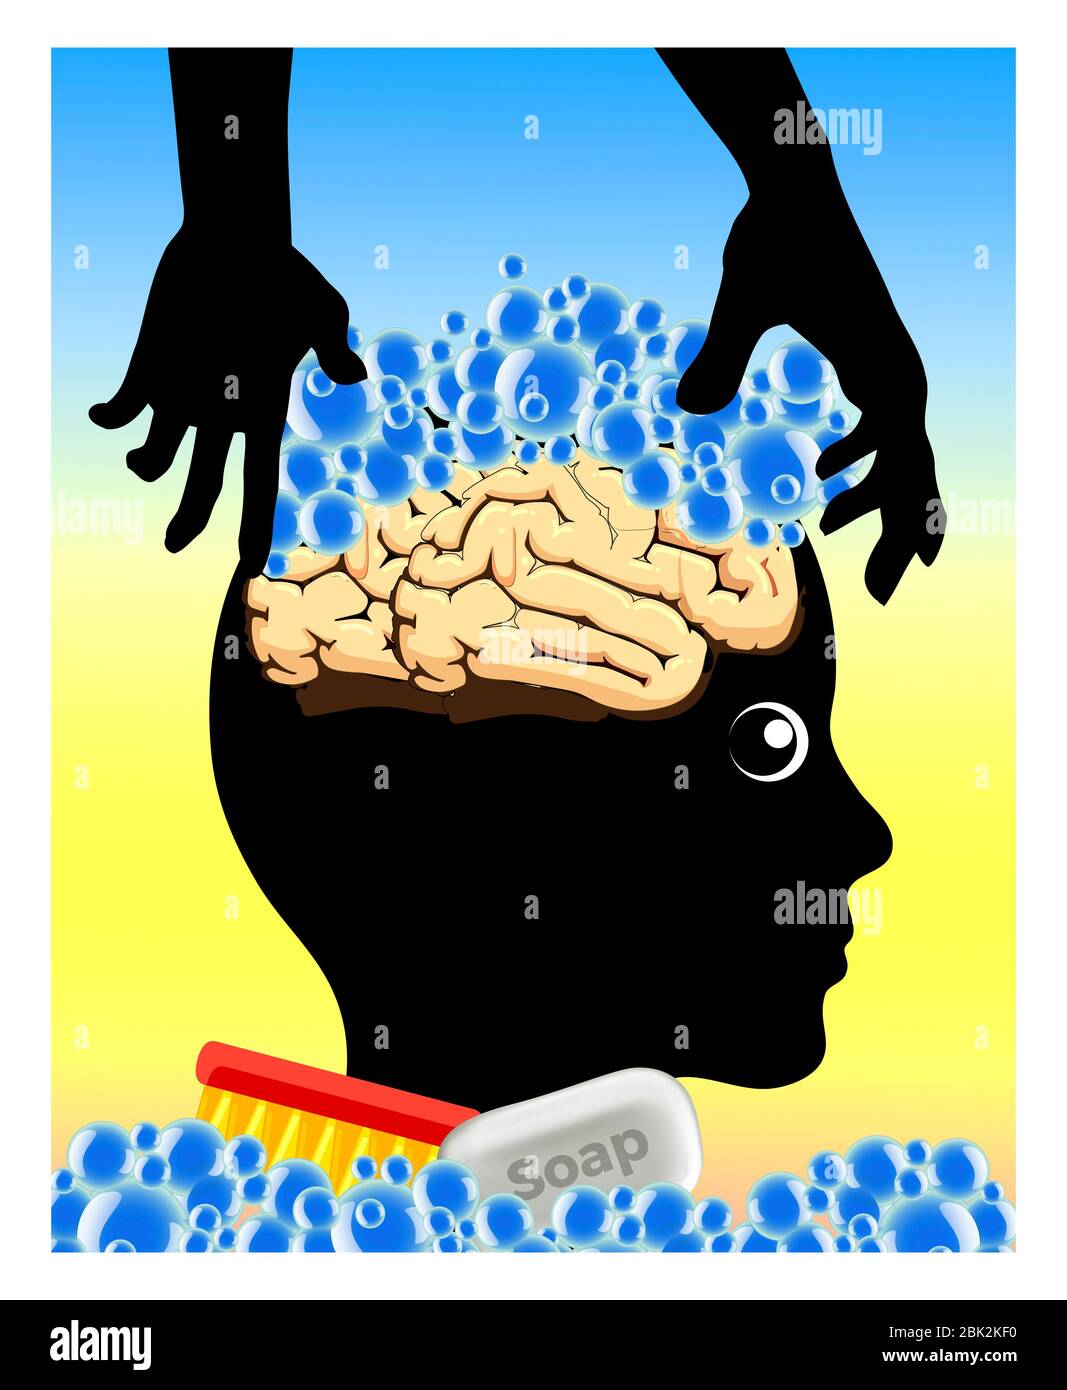 Caricature and metaphor of how the thoughts of people can get manipulated Stock Photo